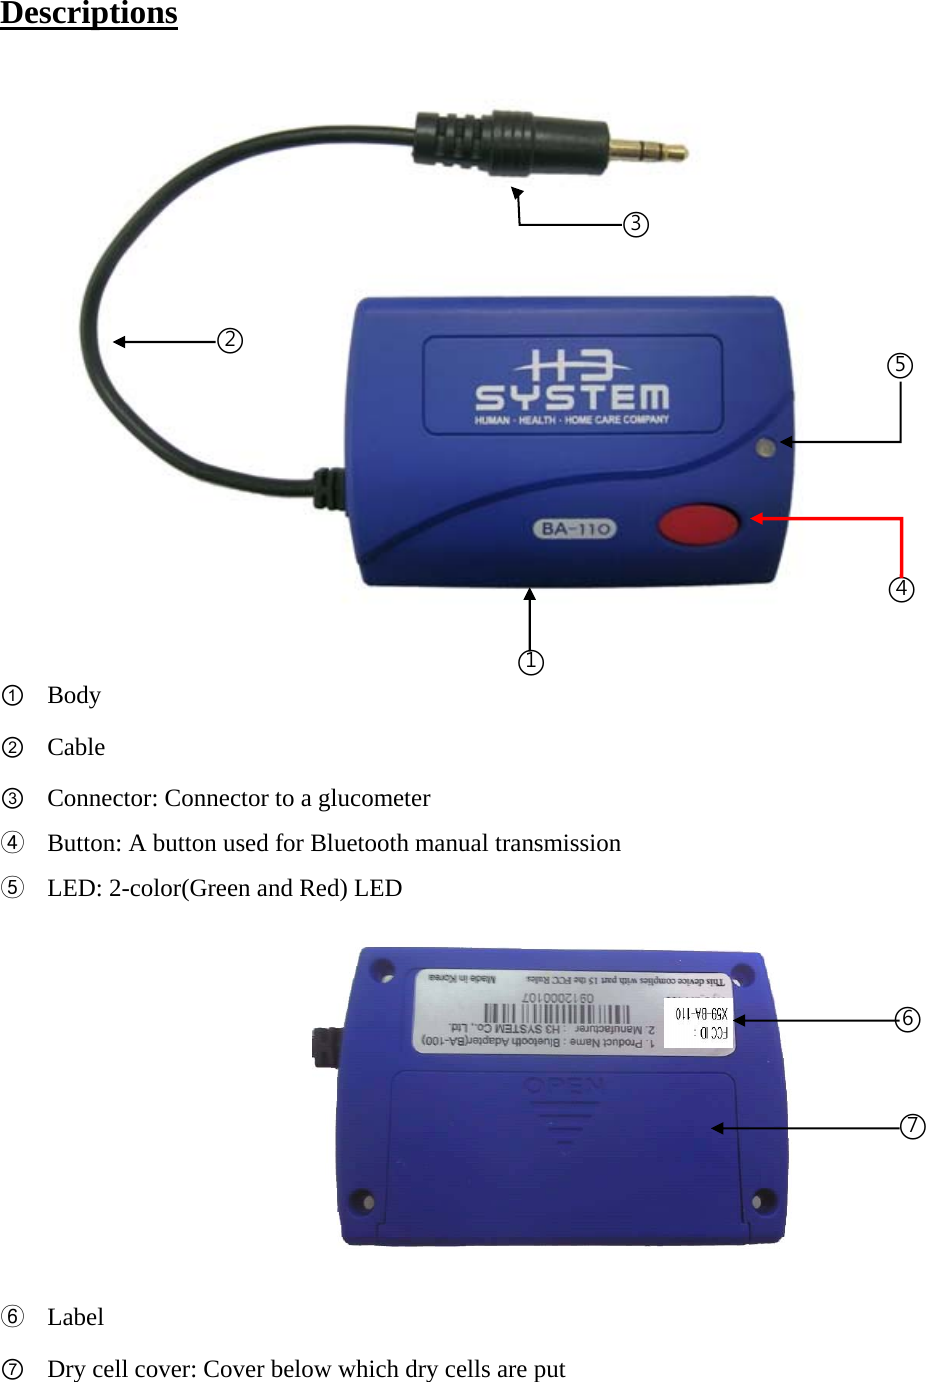 Descriptions  ① Body ② Cable ③ Connector: Connector to a glucometer ④ Button: A button used for Bluetooth manual transmission ⑤ LED: 2-color(Green and Red) LED  ⑥ Label                  ⑦ Dry cell cover: Cover below which dry cells are put ○3 ○2 ○1 ○4 ○5 ○7 ○6 